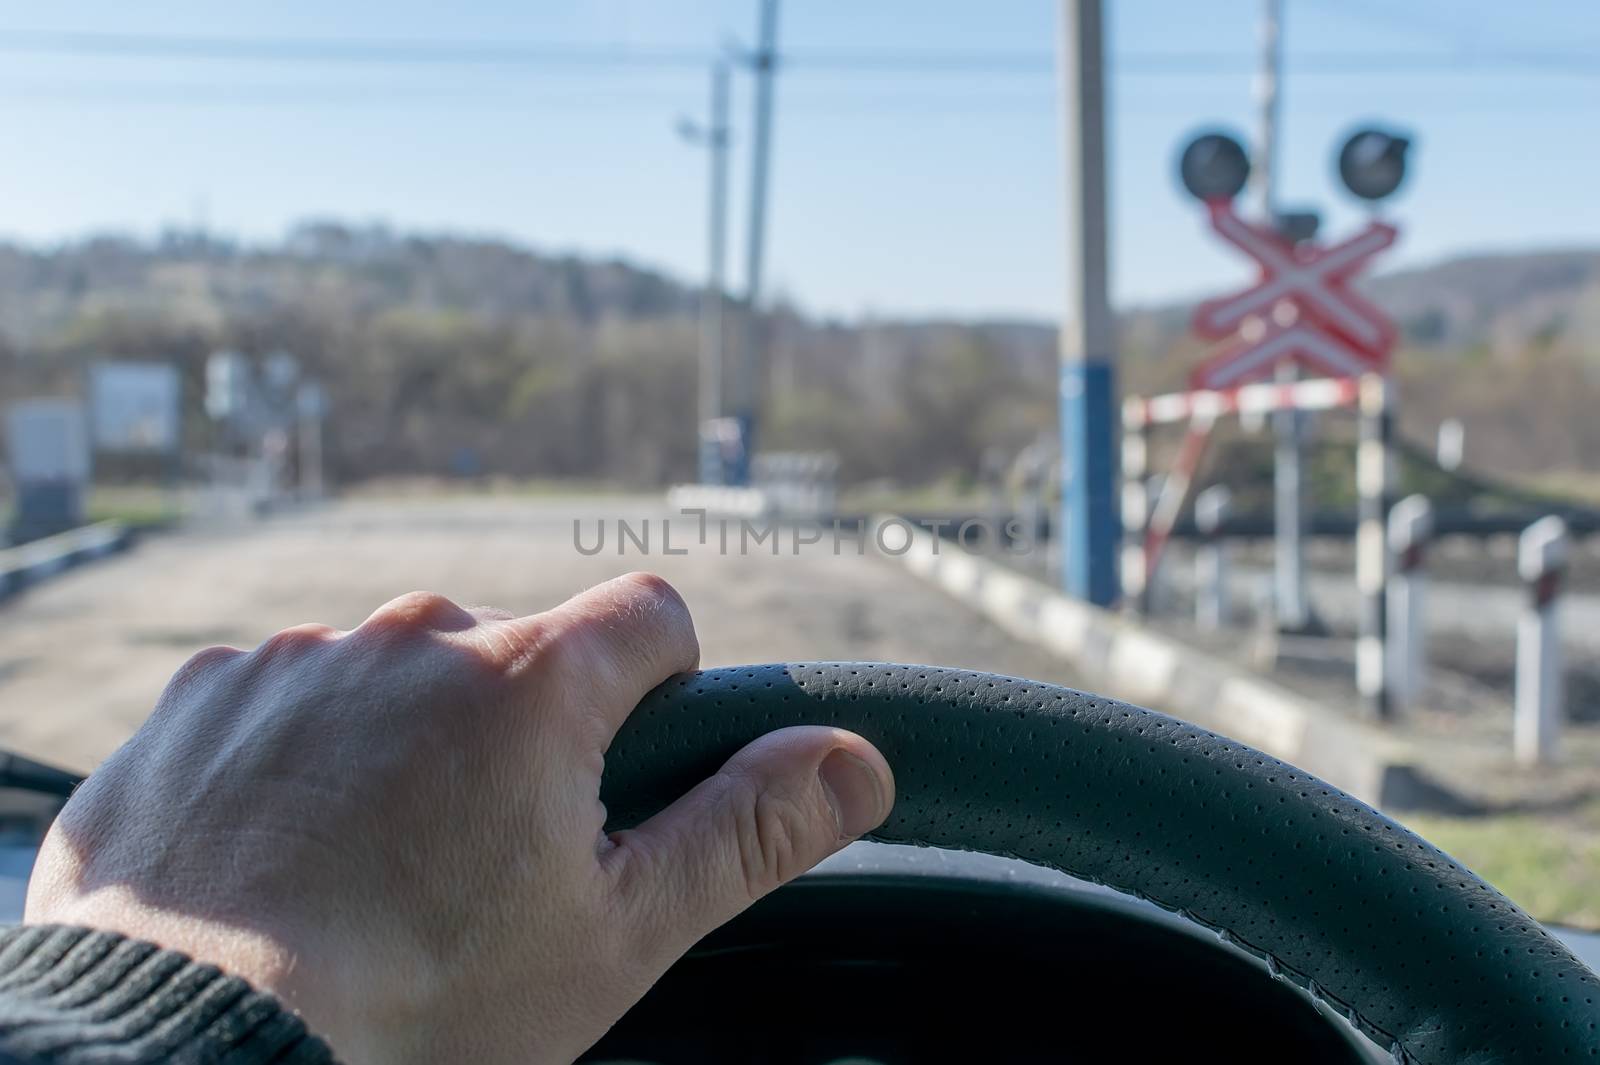 View of the driver's hand on the steering wheel of the car, which stopped before the railway crossing and indicator road signs